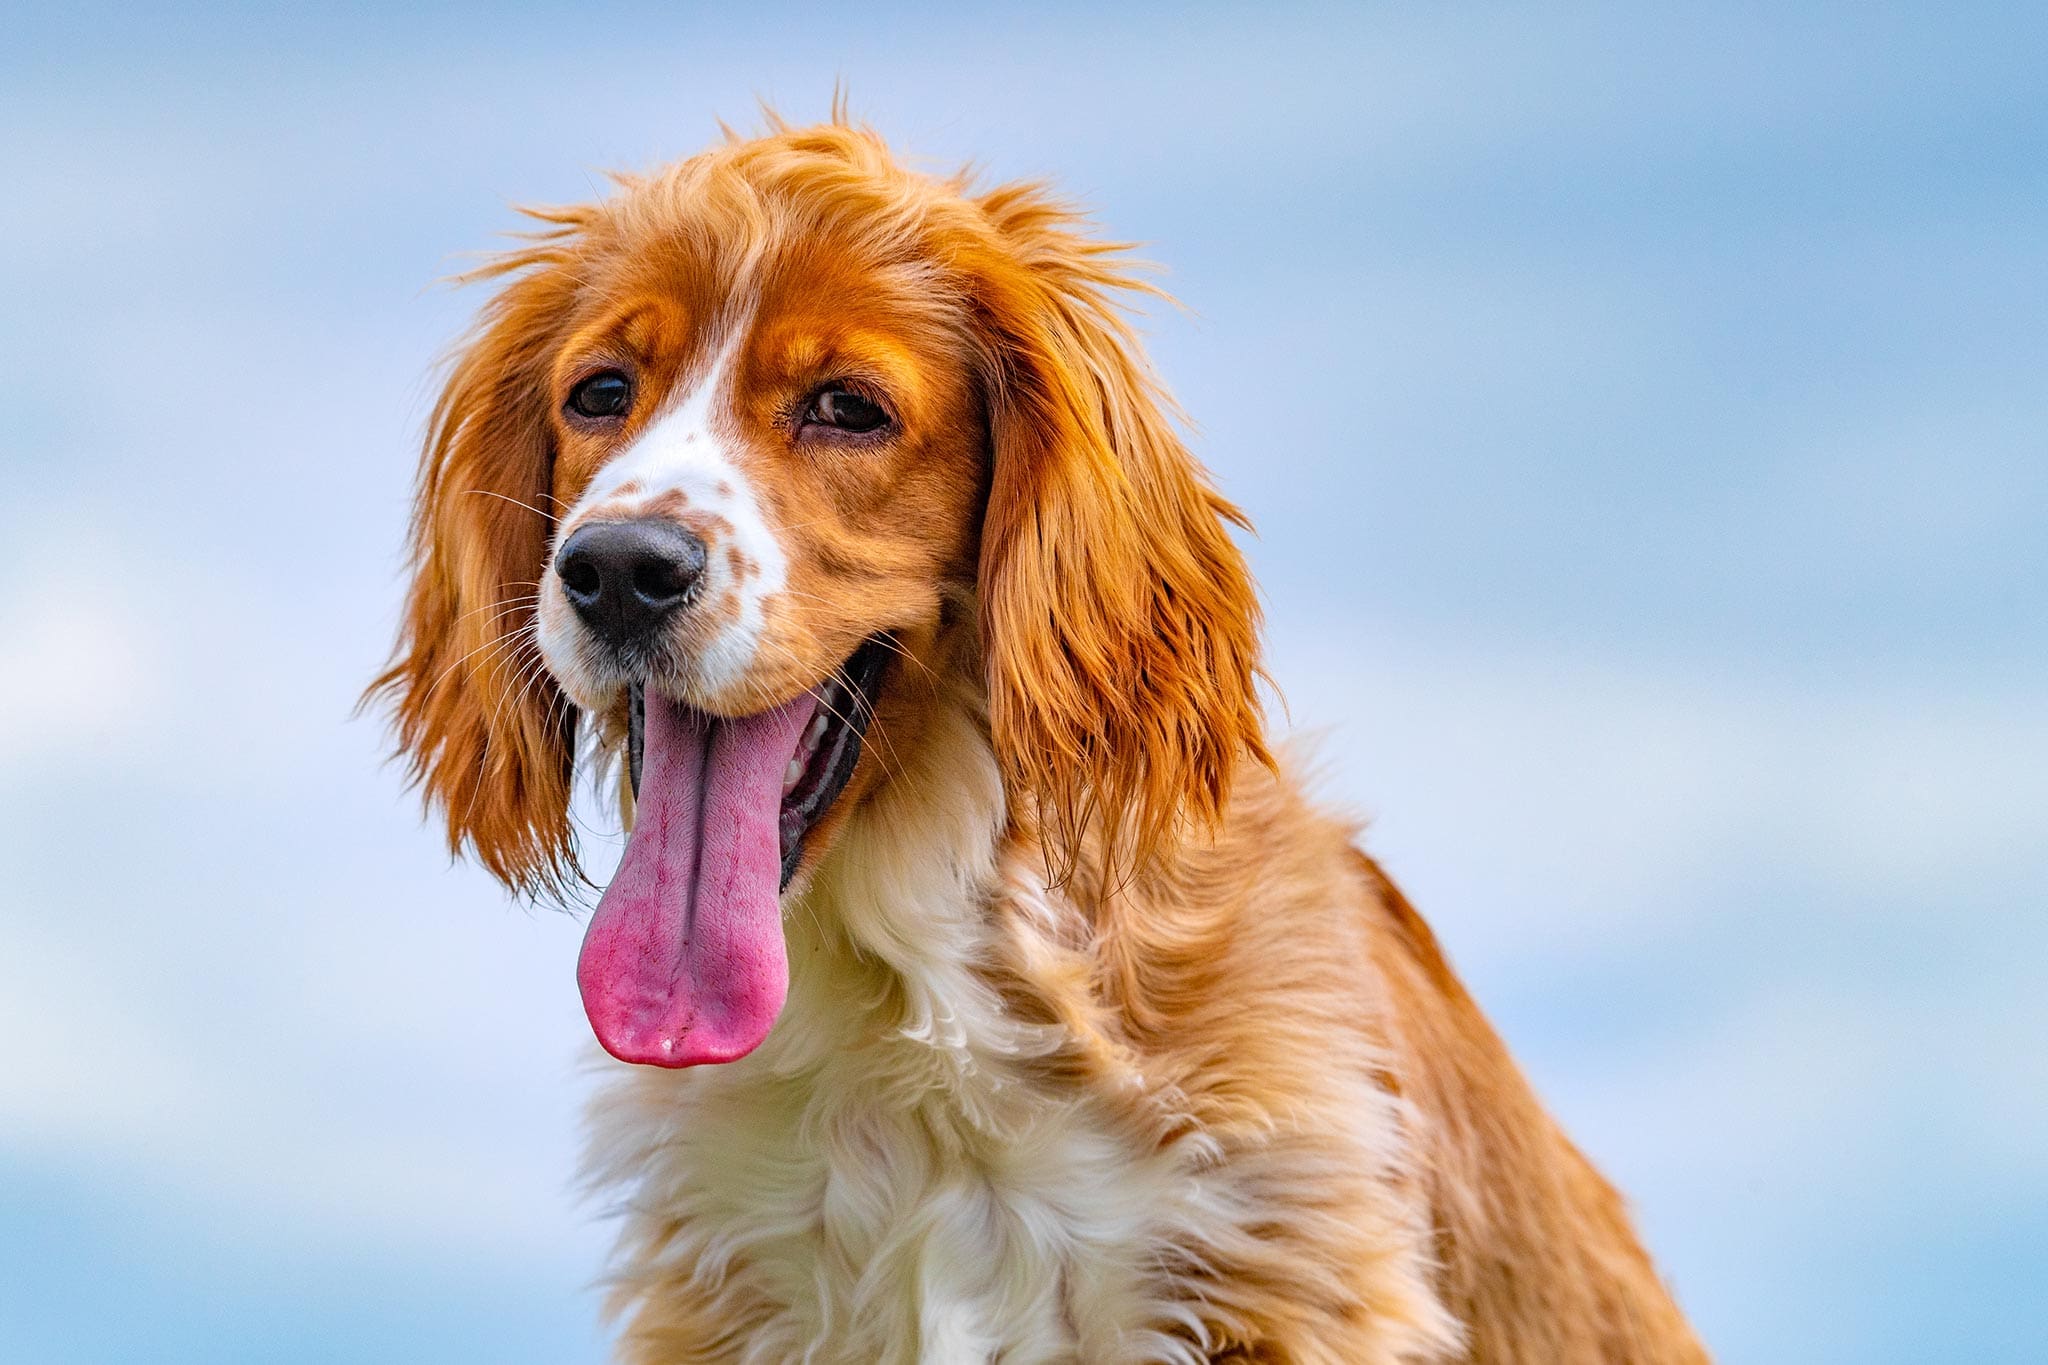 red and white spaniel dog outside on partly cloudy day panting